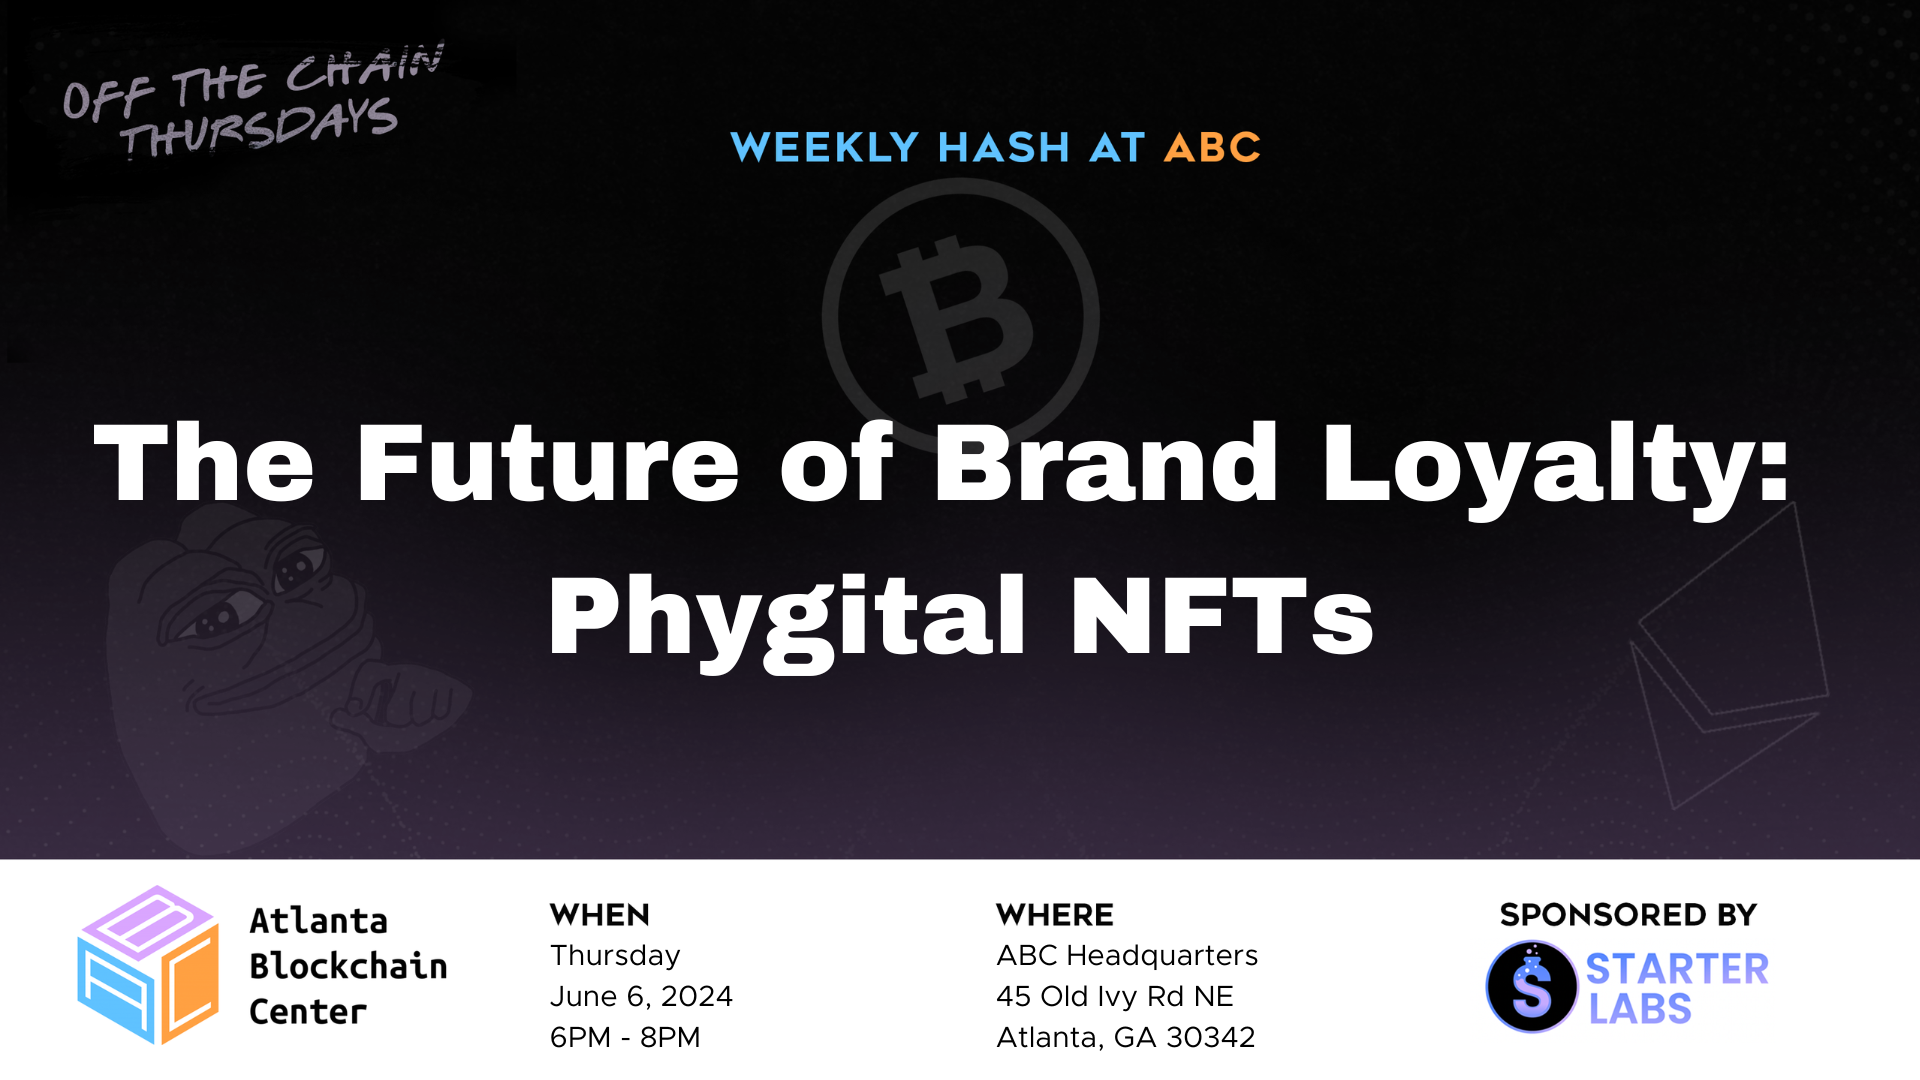 The Future of Brand Loyalty: Phygital NFTs